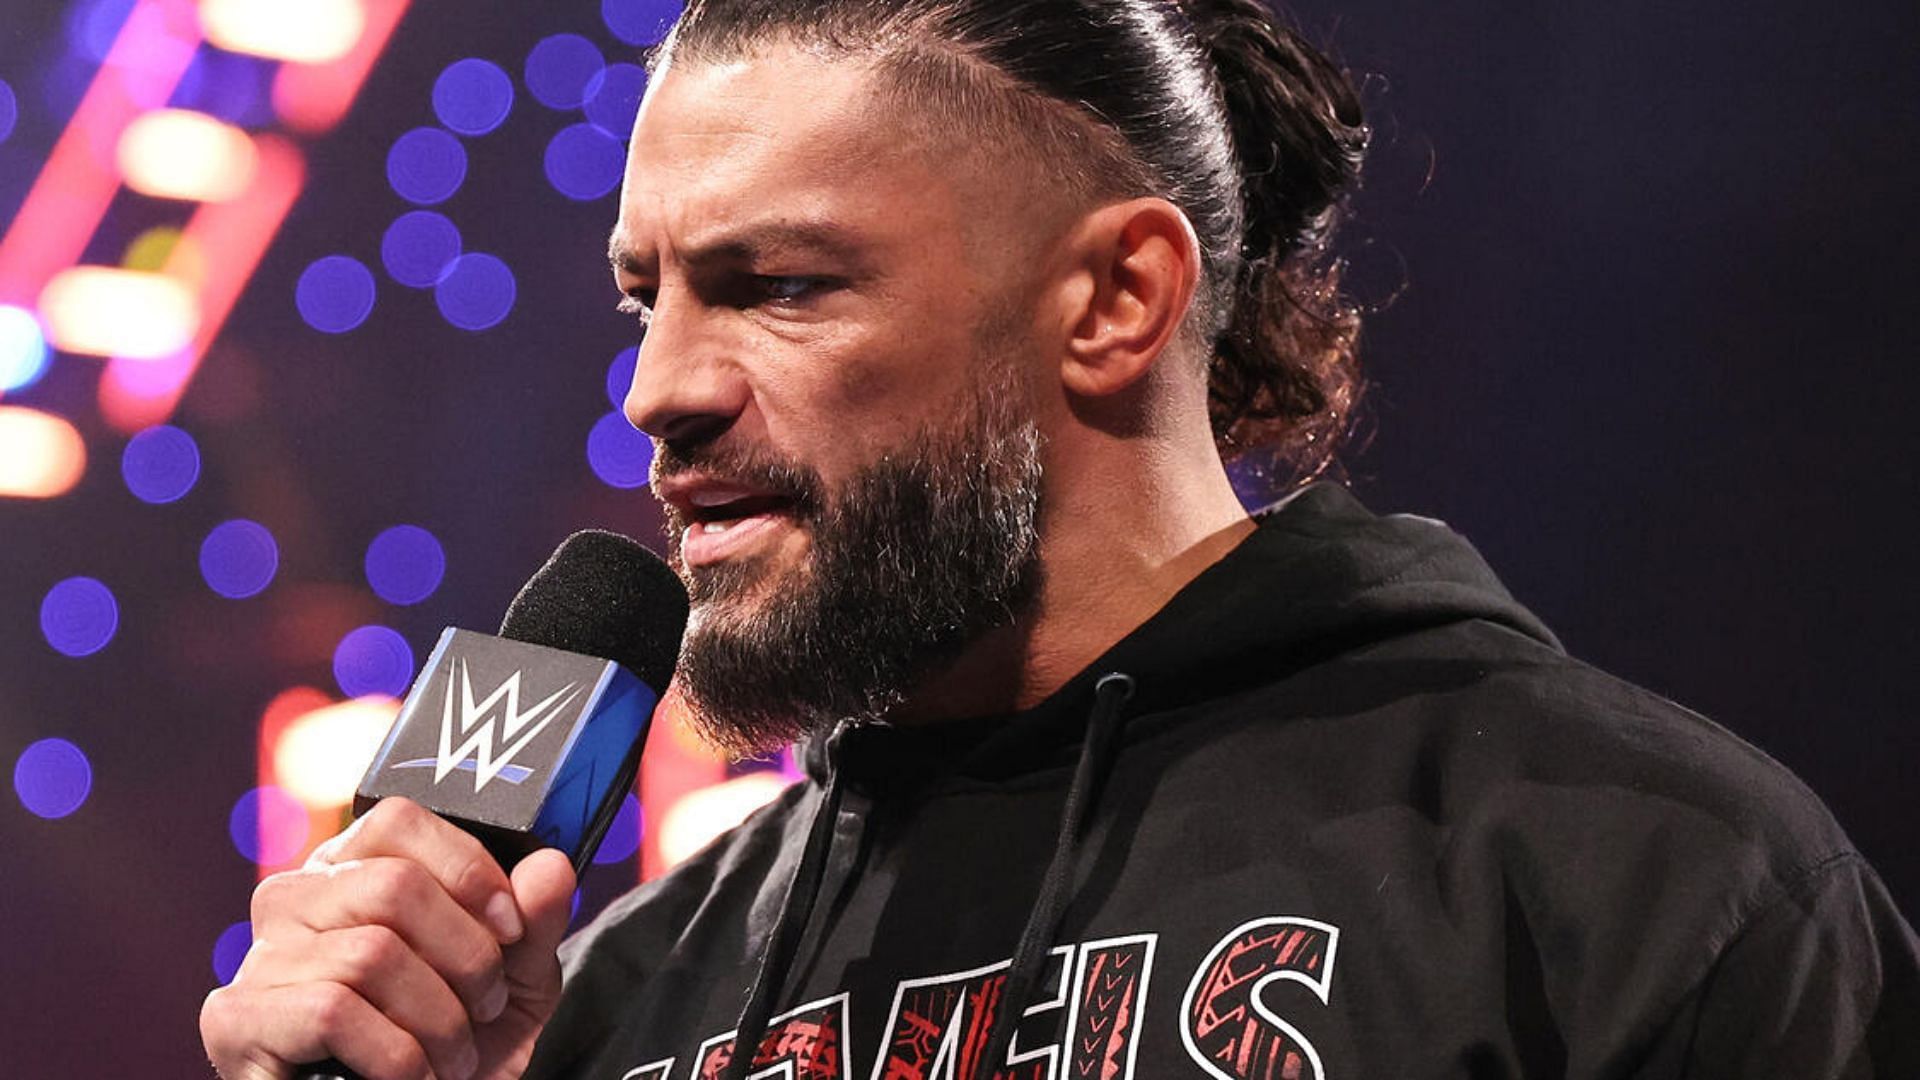 Reigns is the reigning Undipsputed WWE Universal Champion.